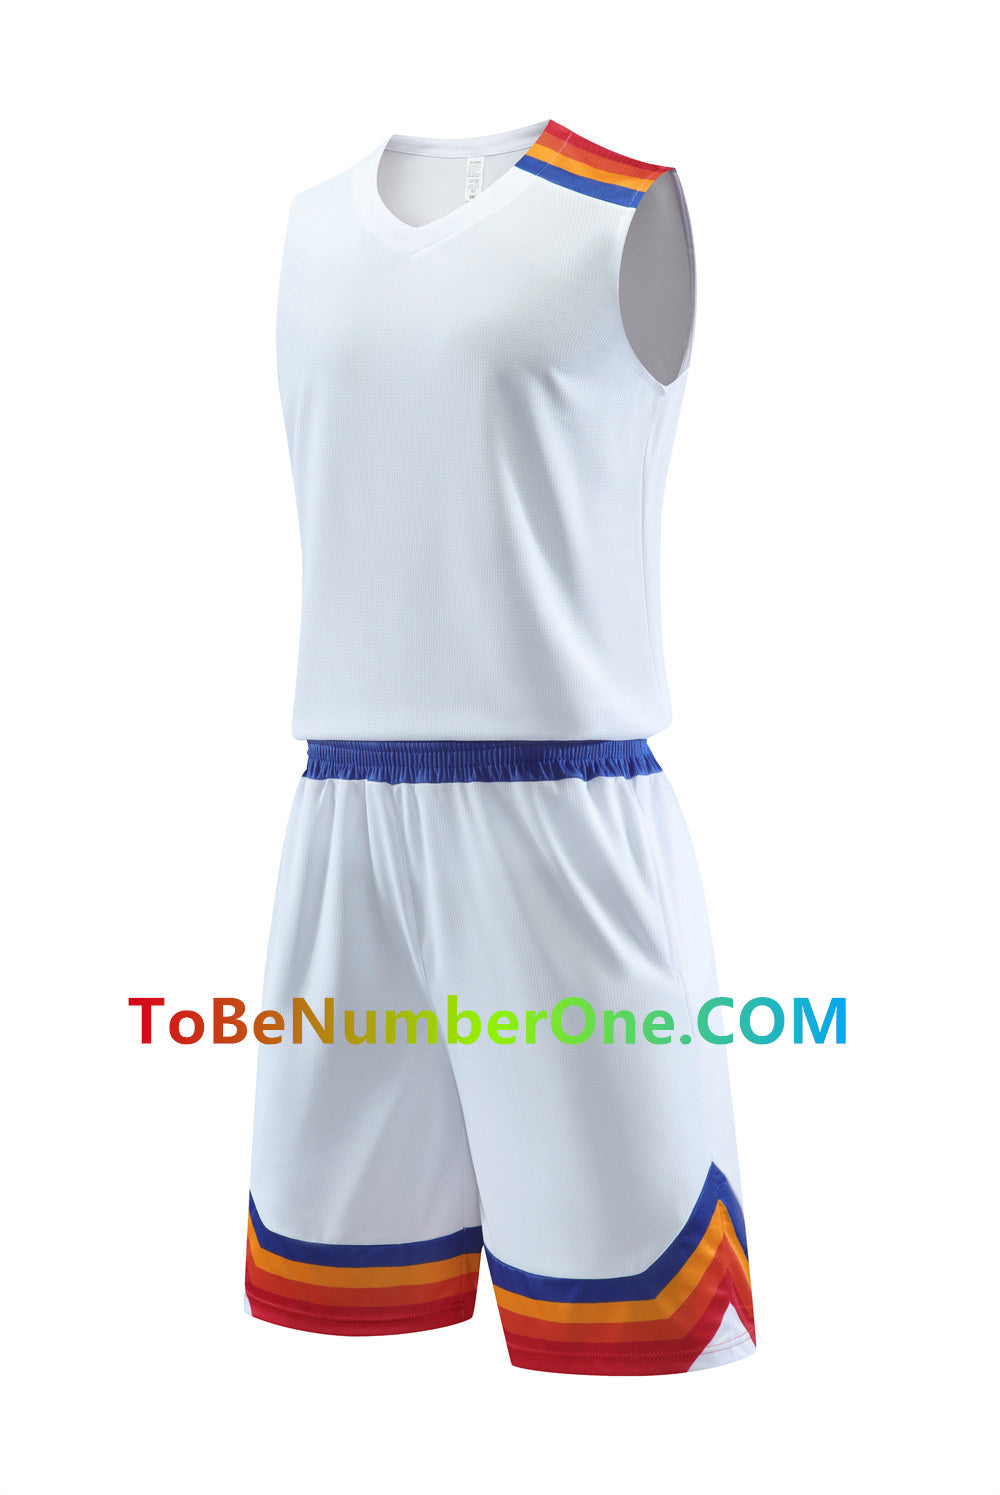 Customize instock High Quality Quick-drying basketball jerseys&shorts with pocket 227#print with team name , player and number.